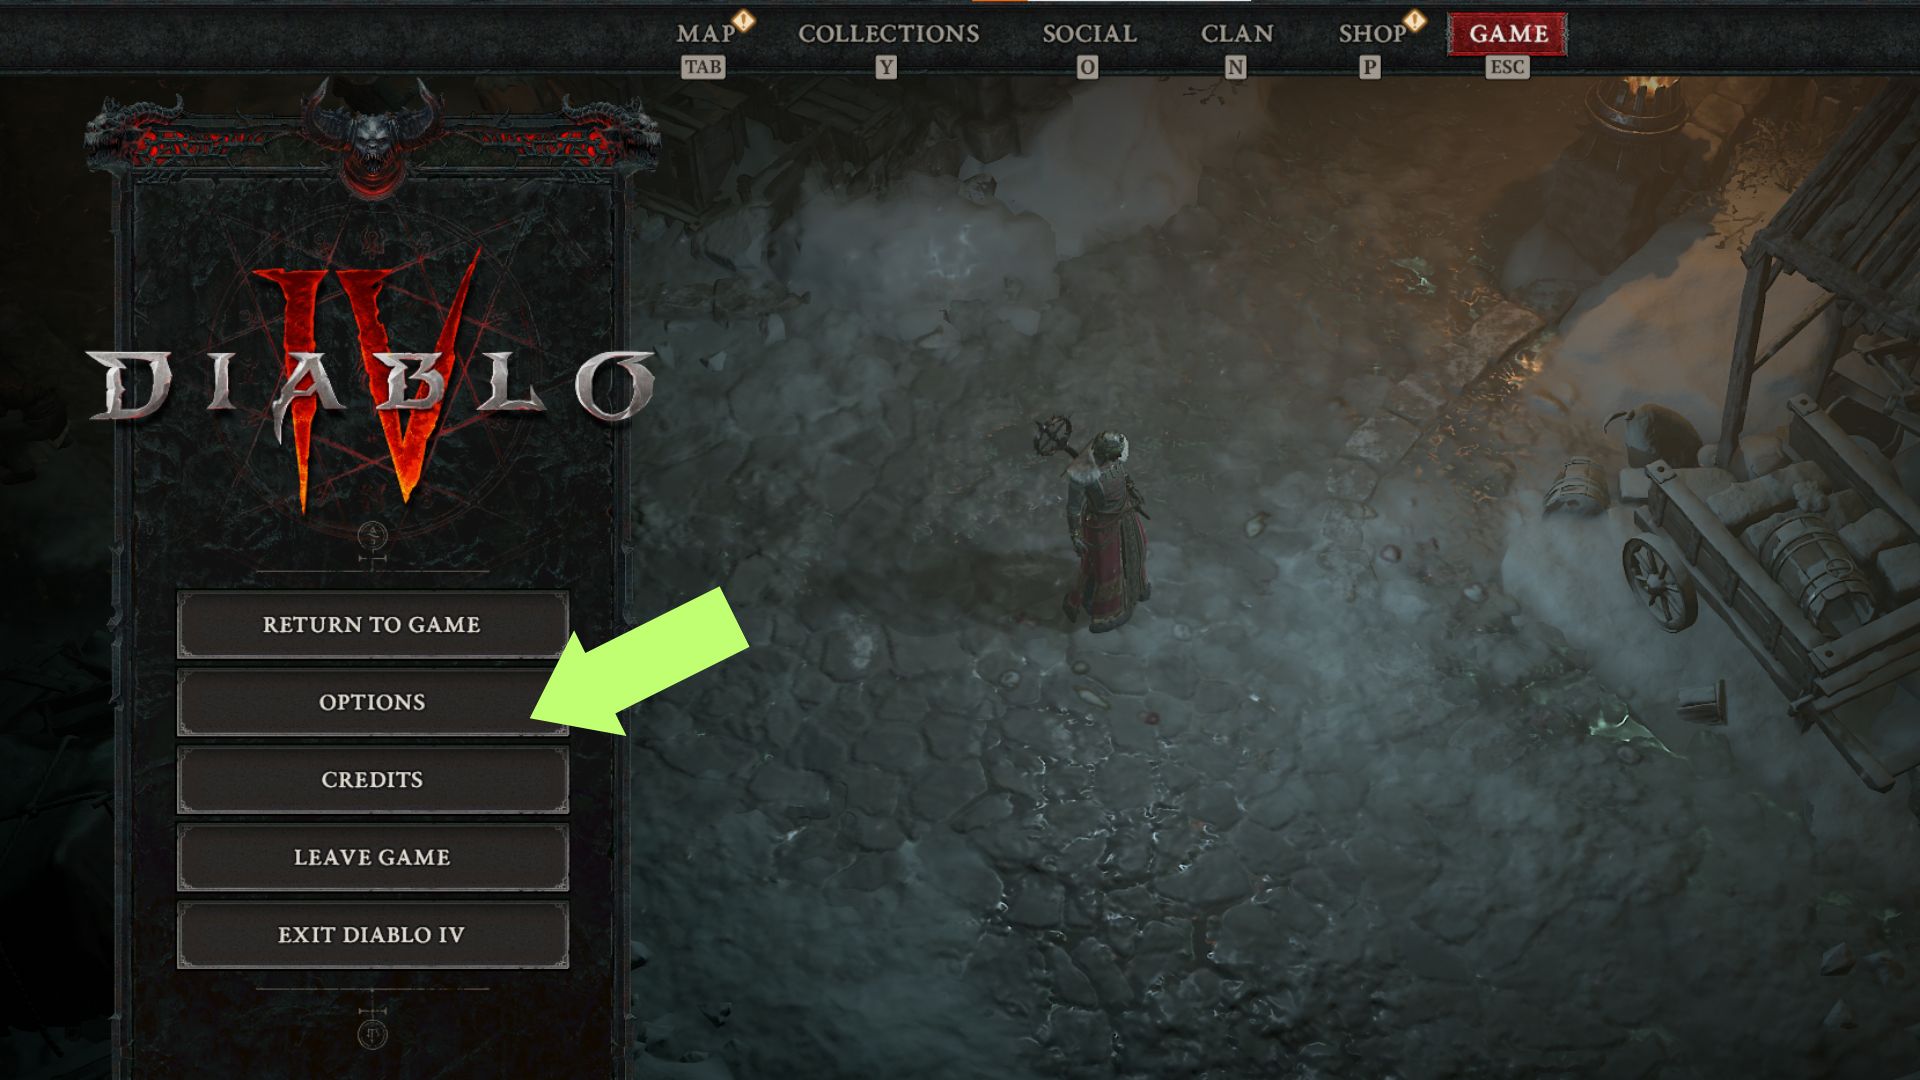 Navigate to the Options menu to find the option to add a glow to your character in Diablo IV. 